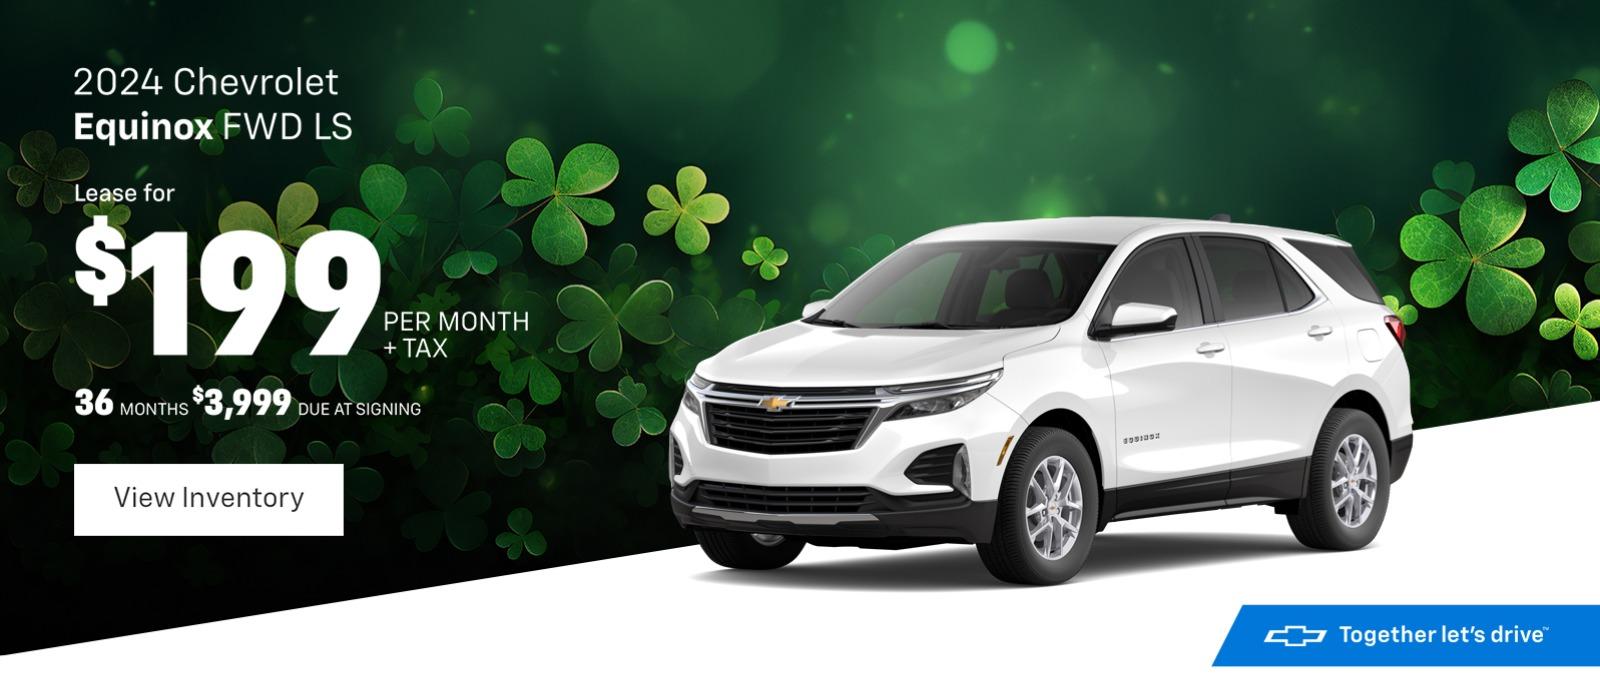 2024 Chevrolet Equinox FWD LS Lease for $199 PER MONTH + TAX 36 MONTHS $3,999 DUE AT SIGNING